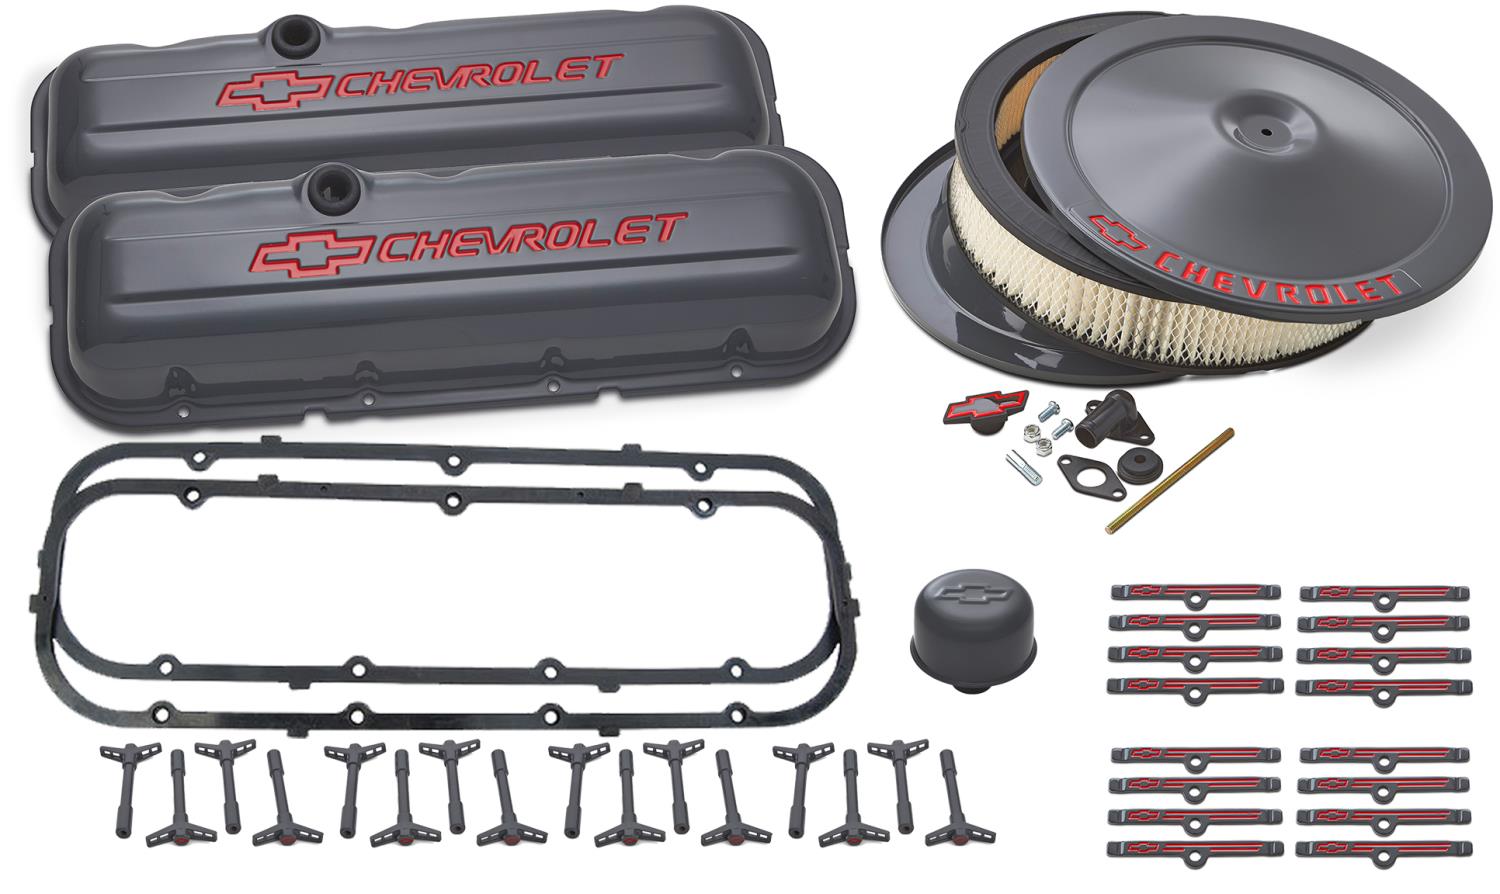 Stamped Steel Short Valve Cover Dress-Up Kit for 1965-1996 Big Block Chevy in Shark Gray Finish